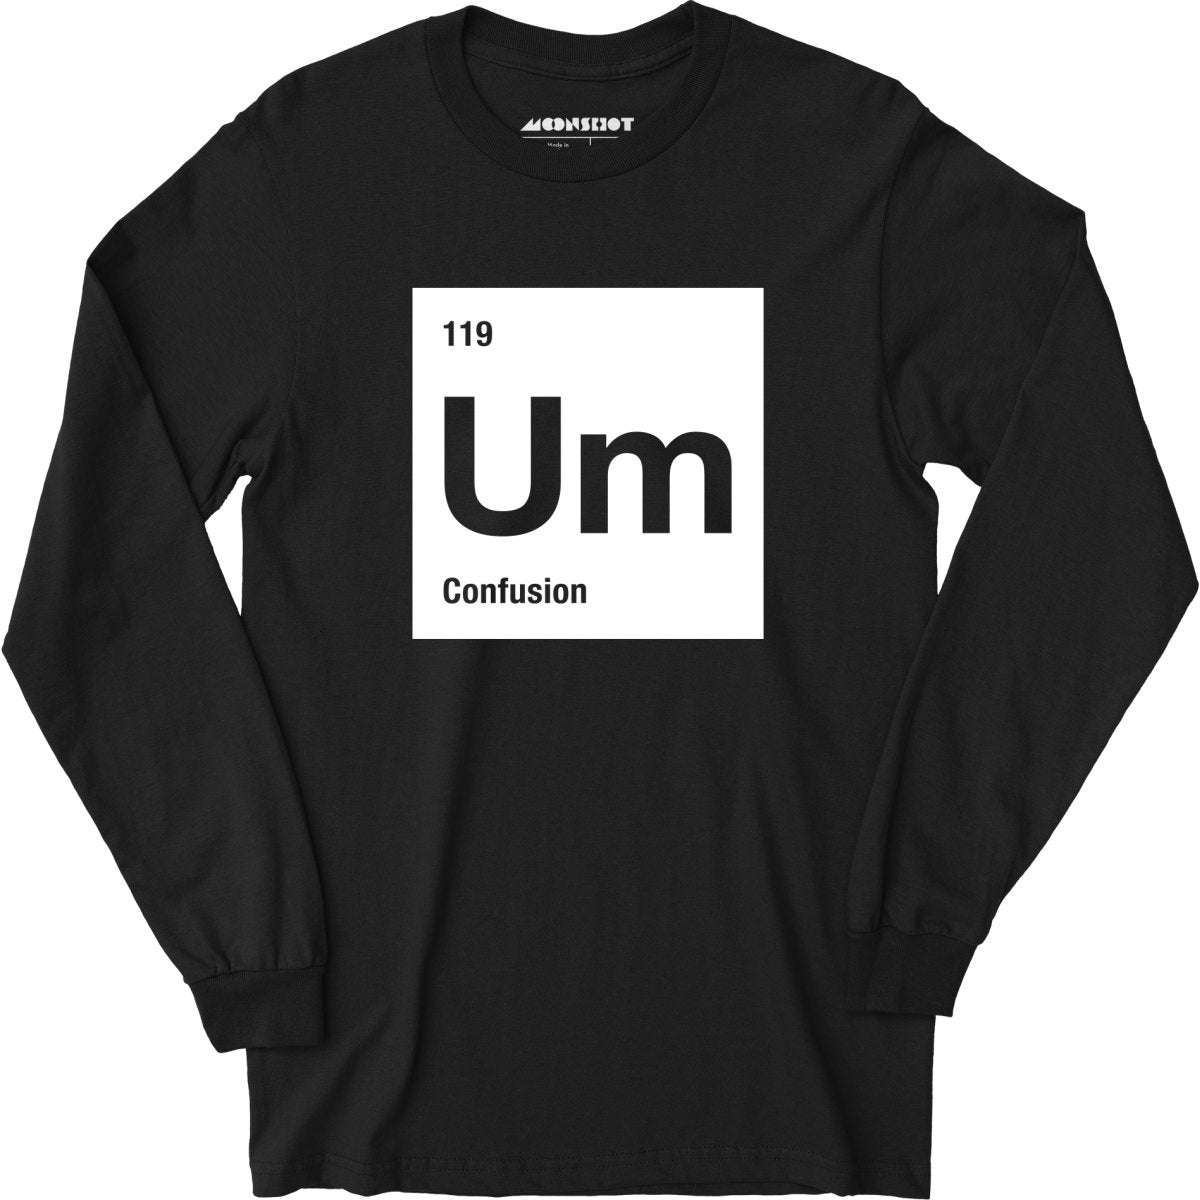 Um - The Element of Confusion - Long Sleeve T-Shirt